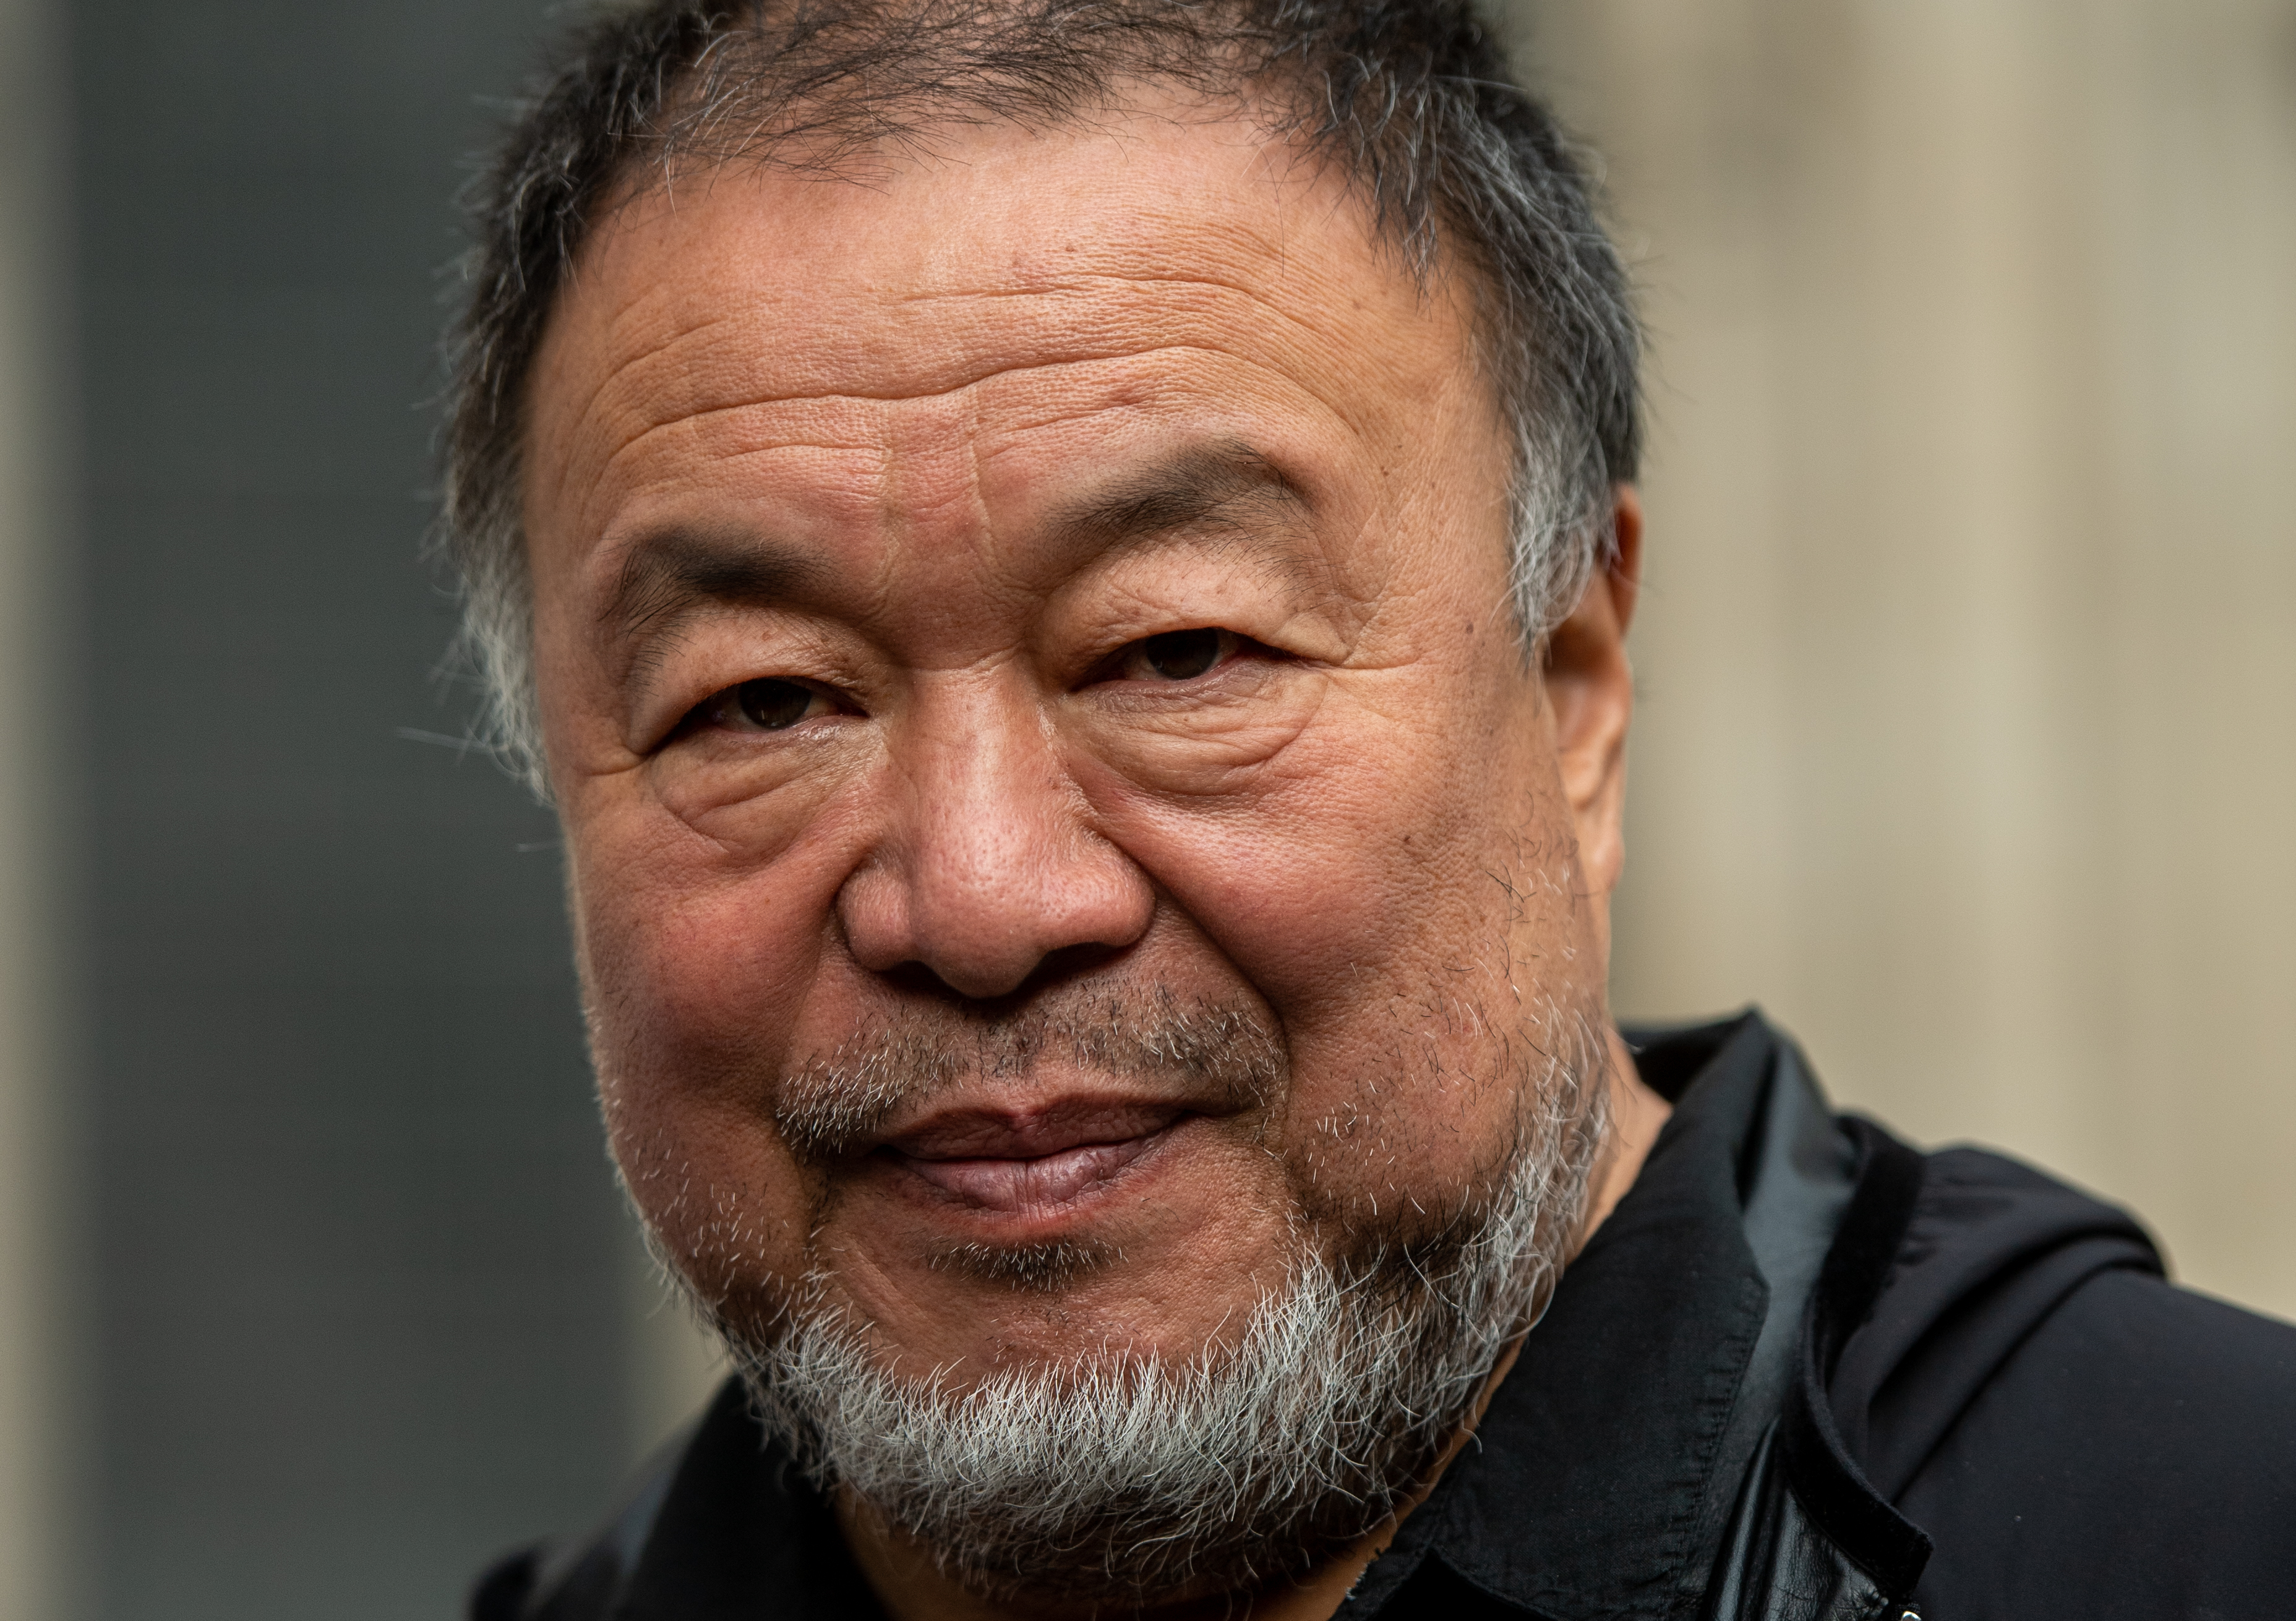 Chinese dissident artist and activist Ai Weiwei is seen outside the Royal Courts of Justice on October 27 in London, England.